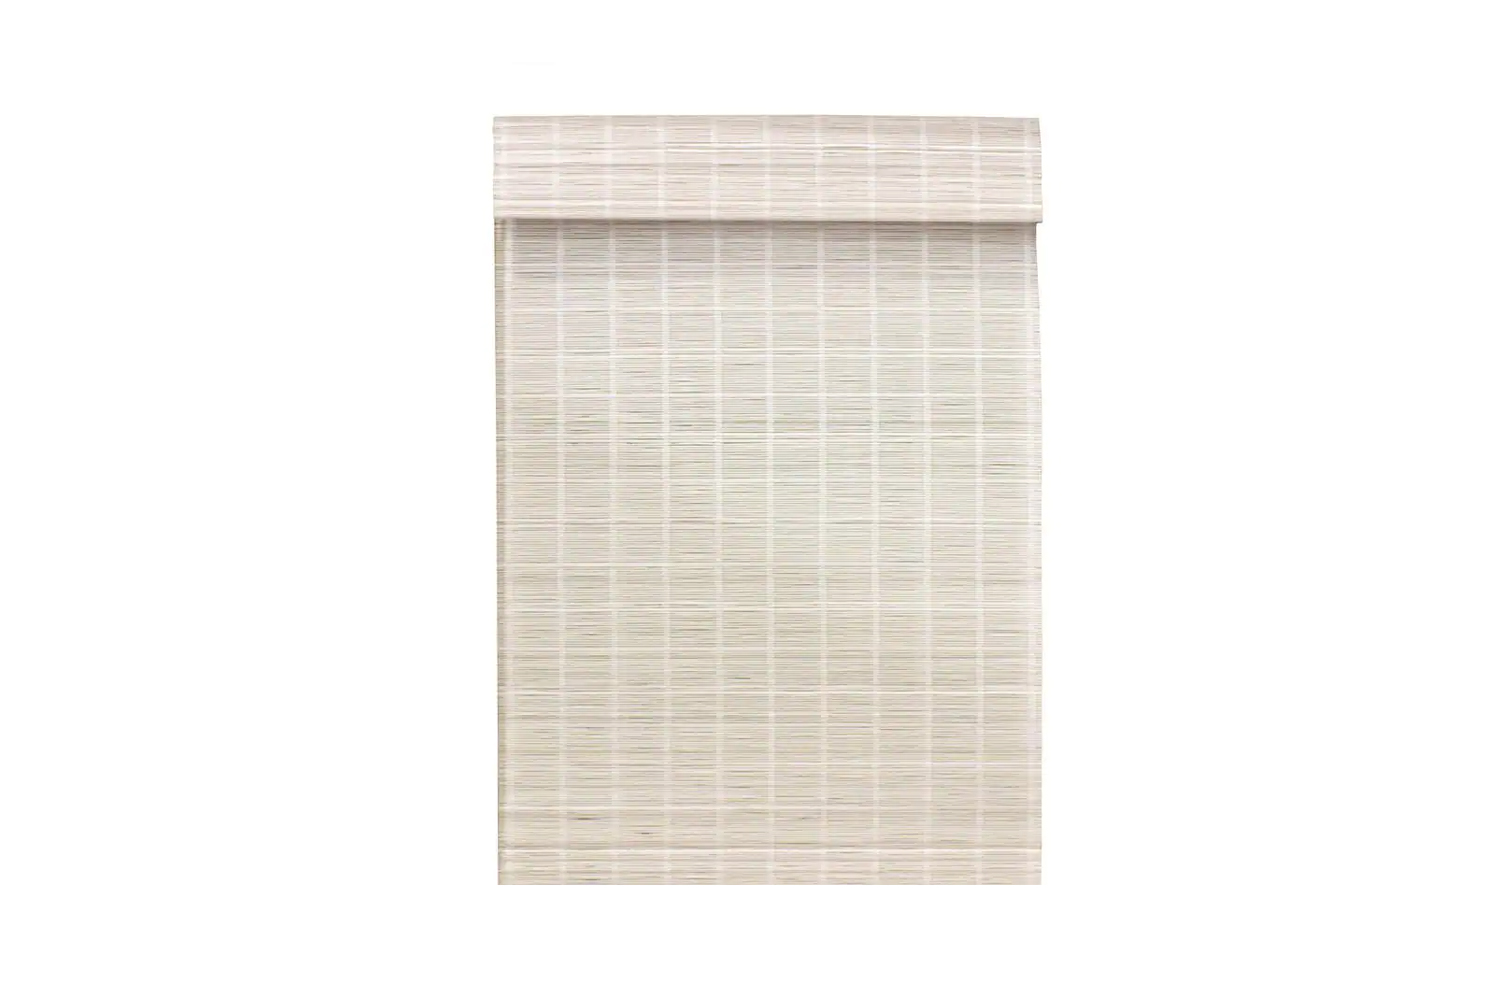 the radiance farmhouse white matchstick bamboo blinds are \$53.4\1 each at the  18